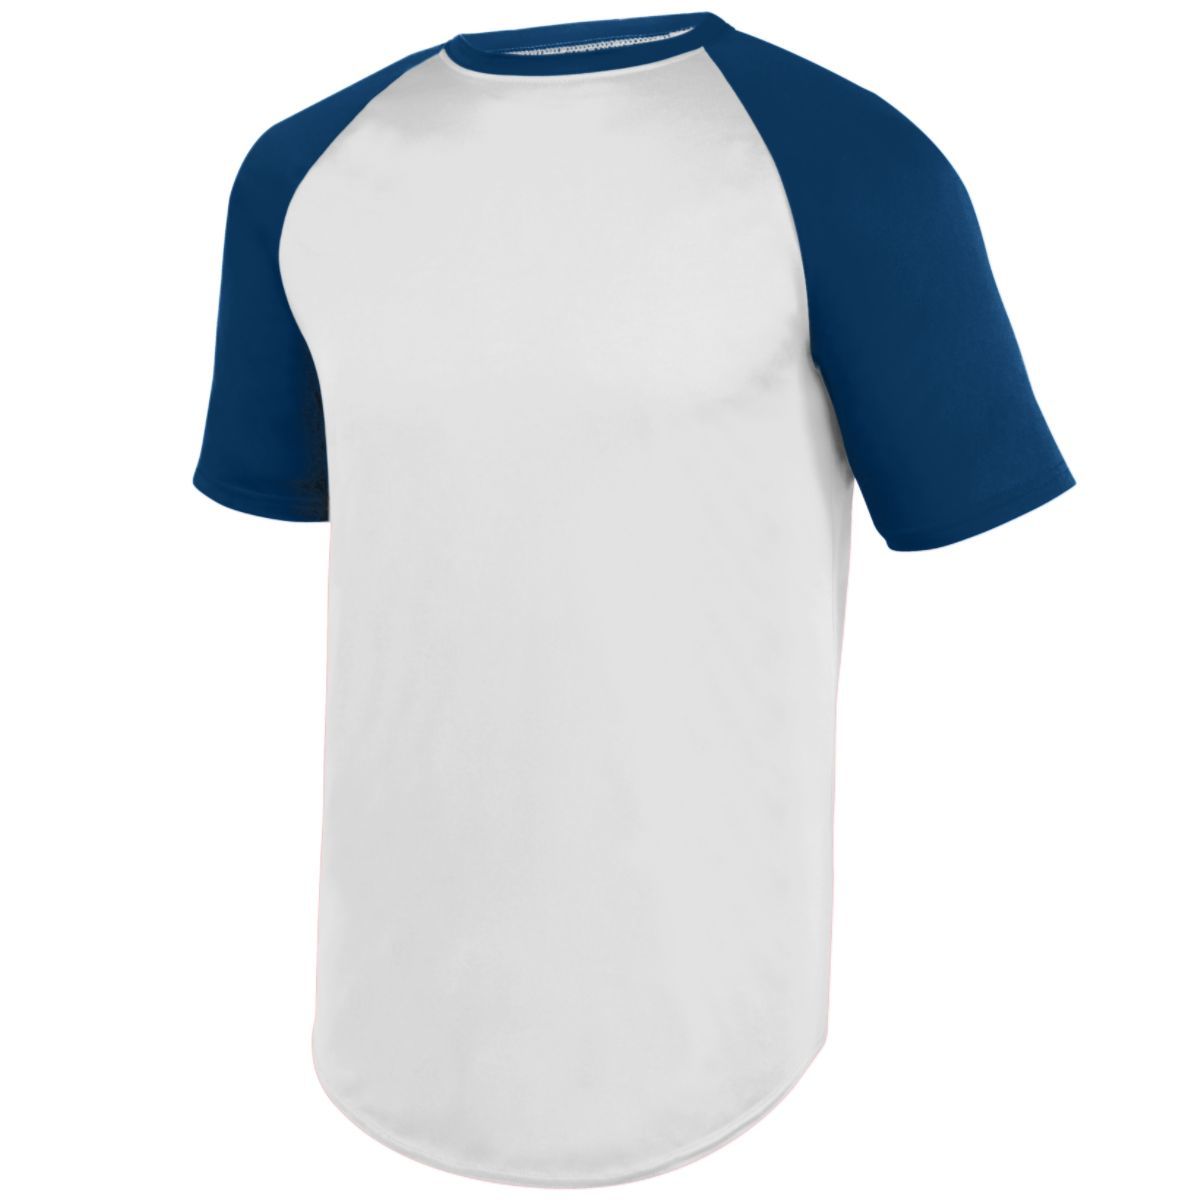 Augusta Sportswear Wicking Short Sleeve Baseball Jersey in White/Navy  -Part of the Adult, Adult-Jersey, Augusta-Products, Baseball, Shirts, All-Sports, All-Sports-1 product lines at KanaleyCreations.com